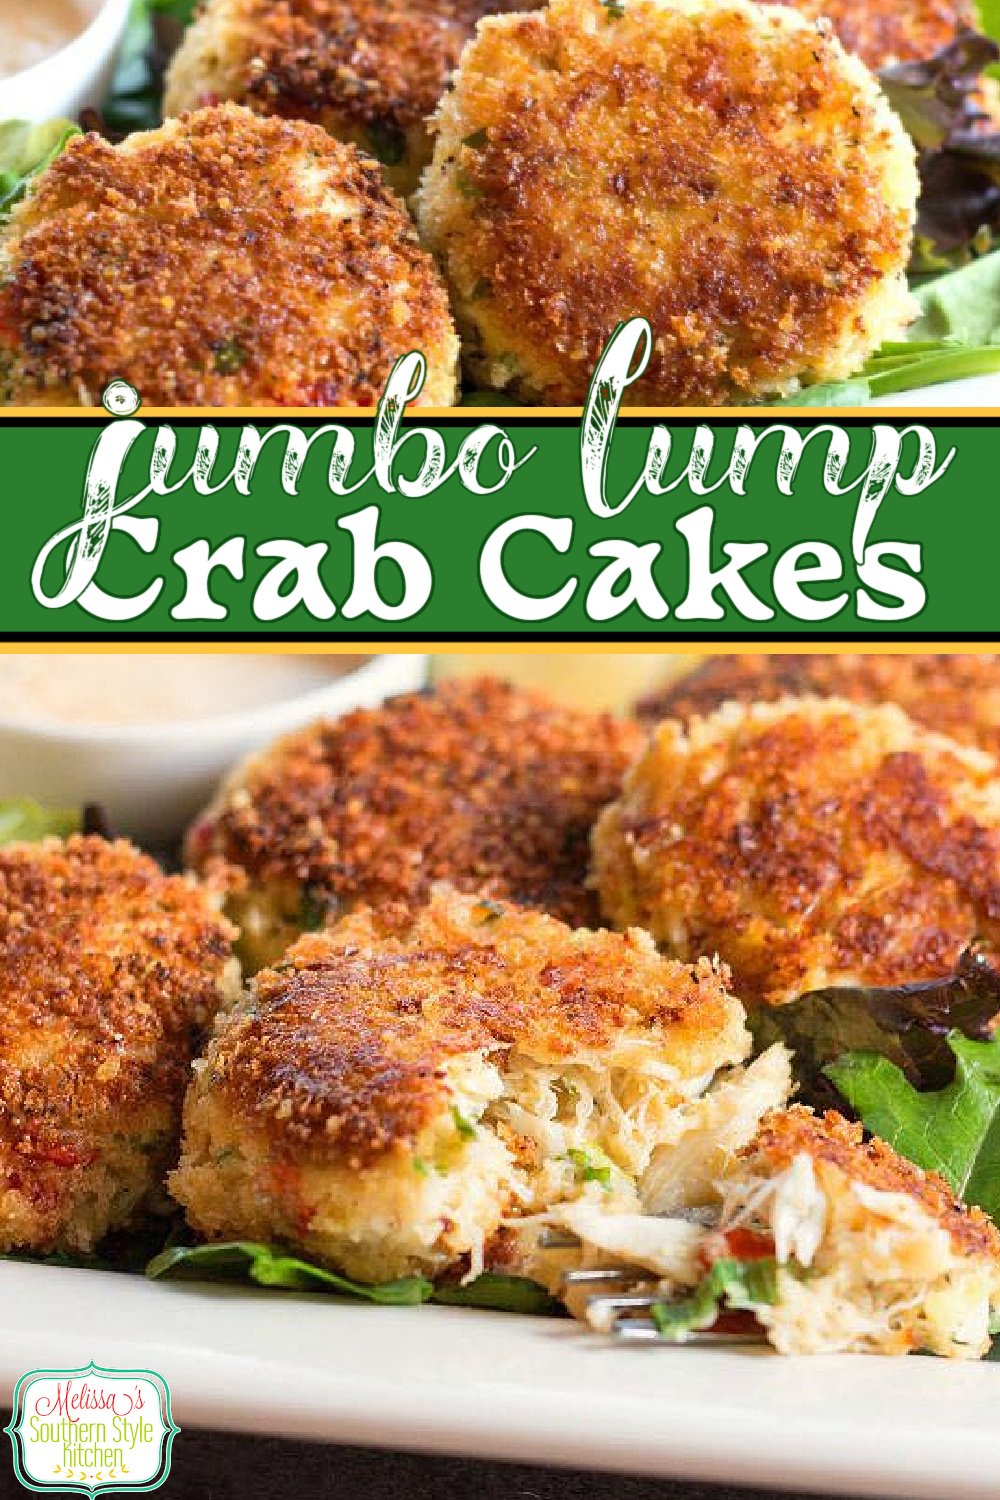 Save money and enjoy these spectacular Jumbo Lump Crab Cakes at home #crabcakes #crab #jumbolumpcrabmeat #crabrecipes #dinnerideas #seafood #seafoodrecipes #southernfood #southernrecipes via @melissasssk